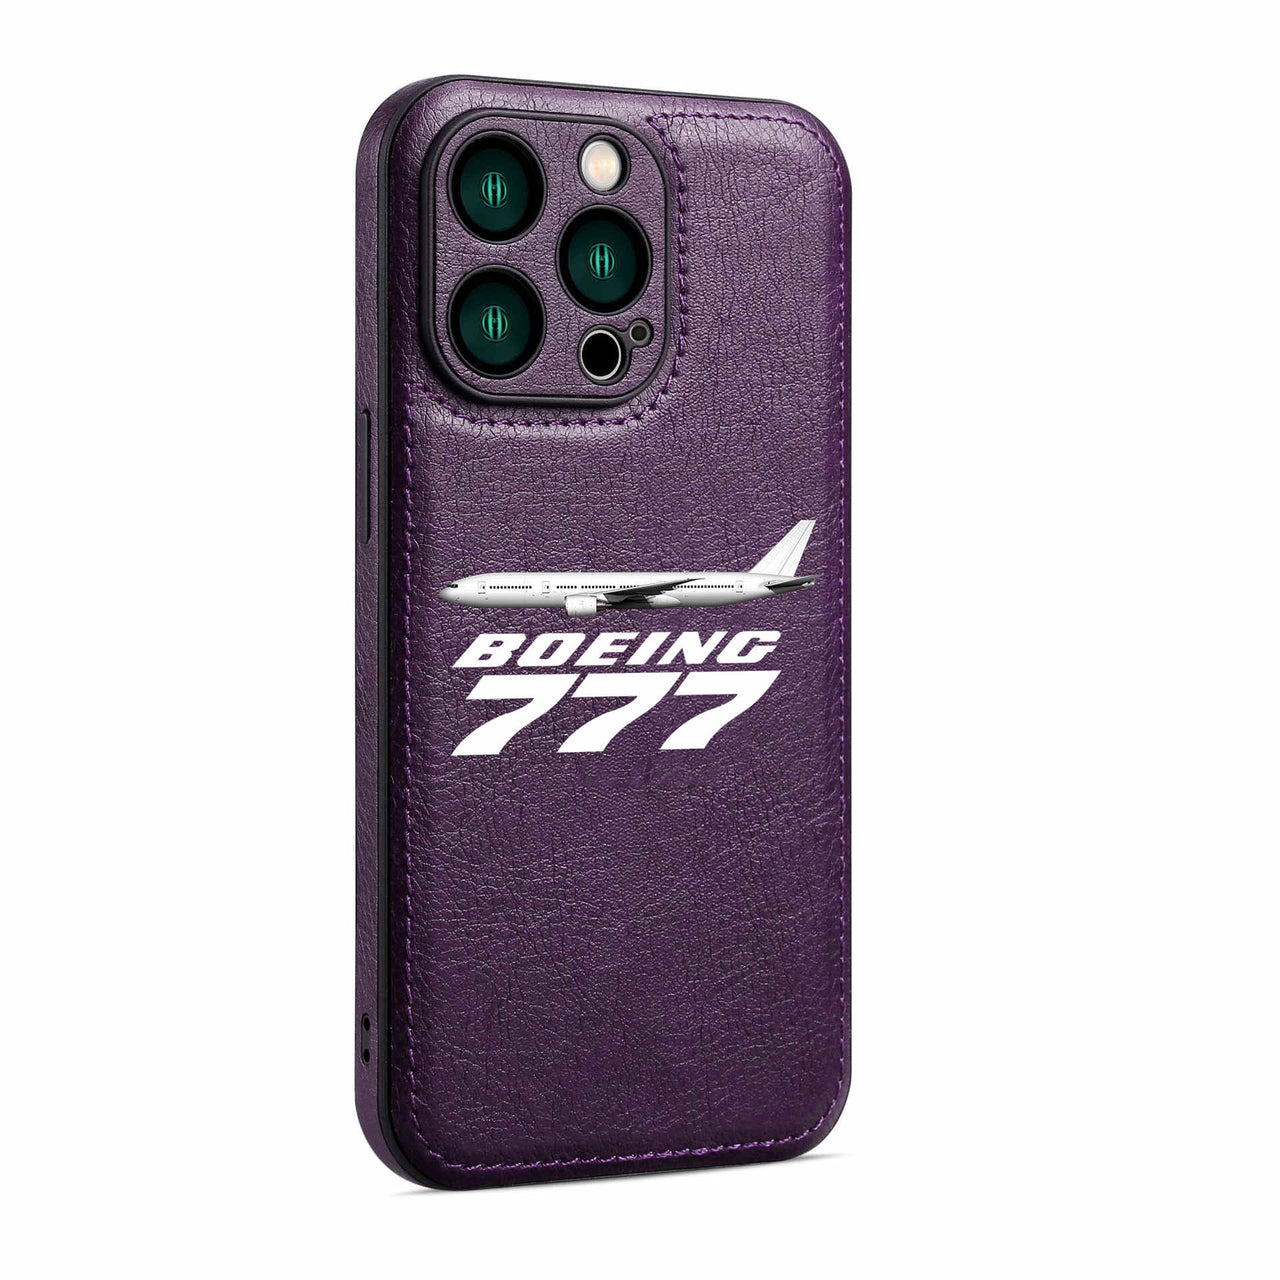 The Boeing 777 Designed Leather iPhone Cases